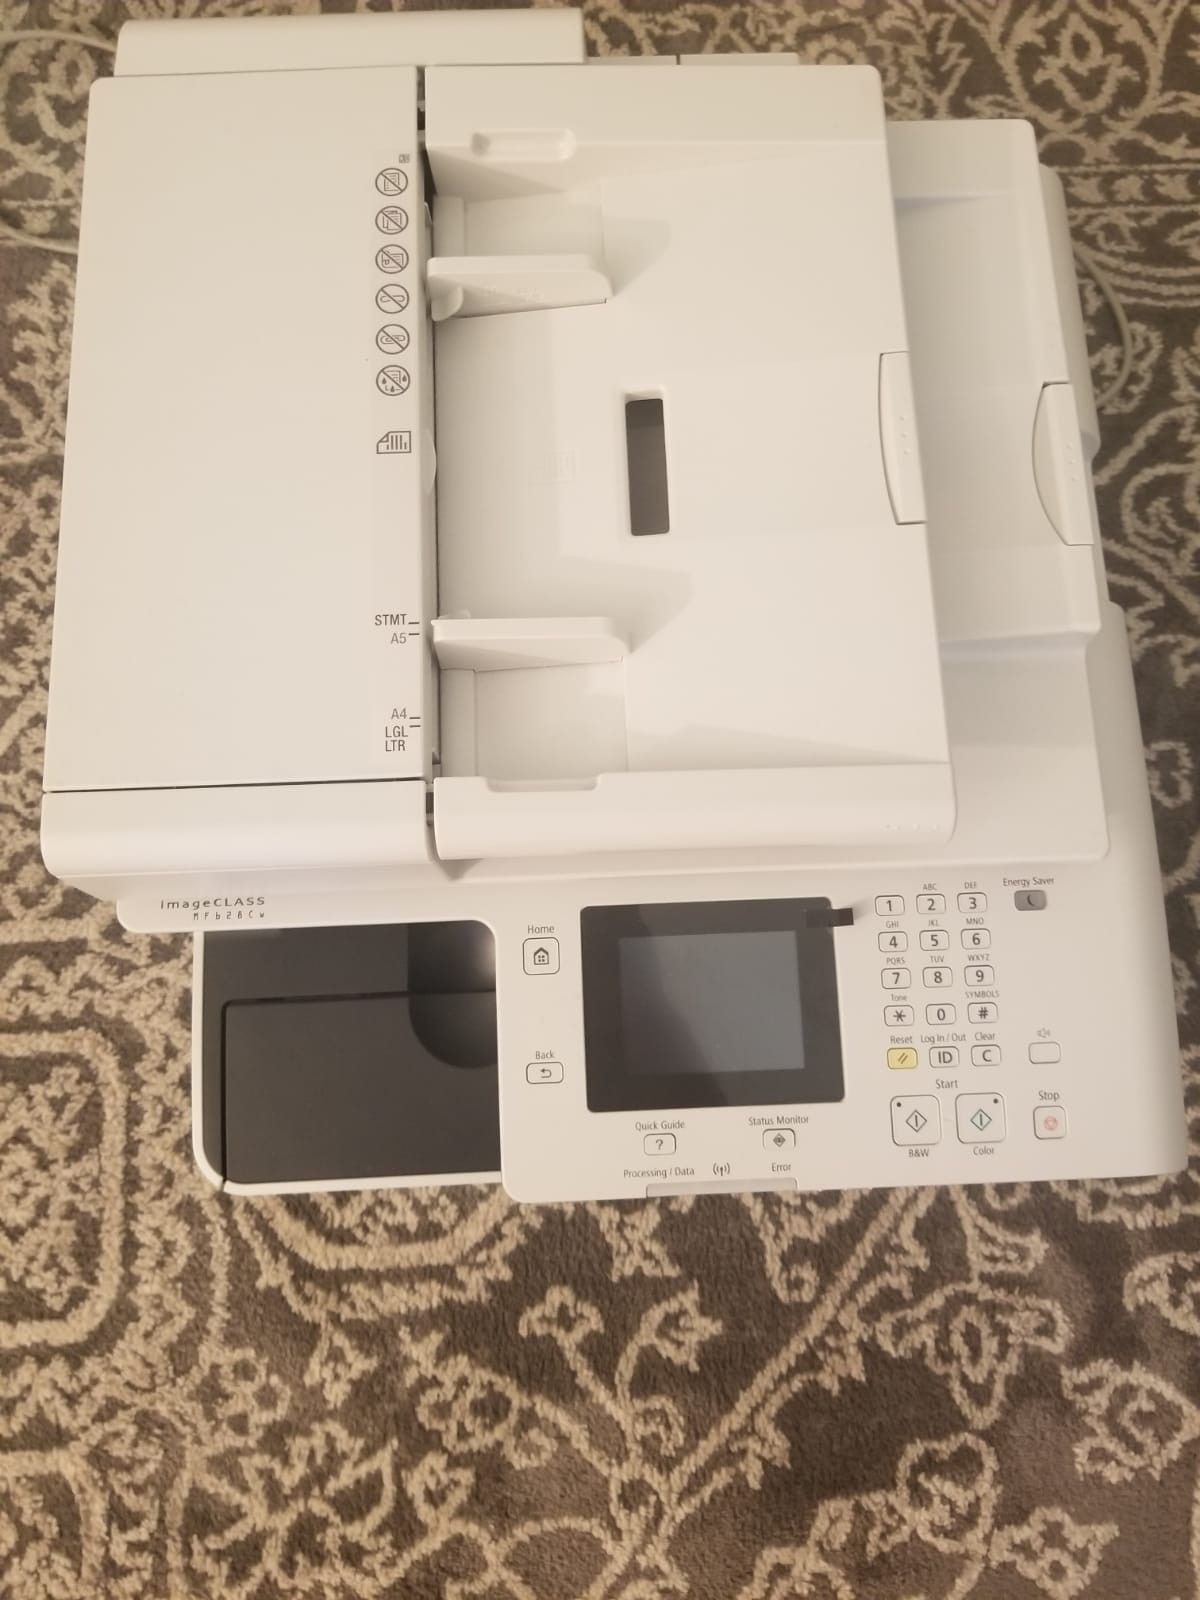 Canon Office MF628Cw imageCLASS Wireless Color Printer with Scanner, Copier & Fax